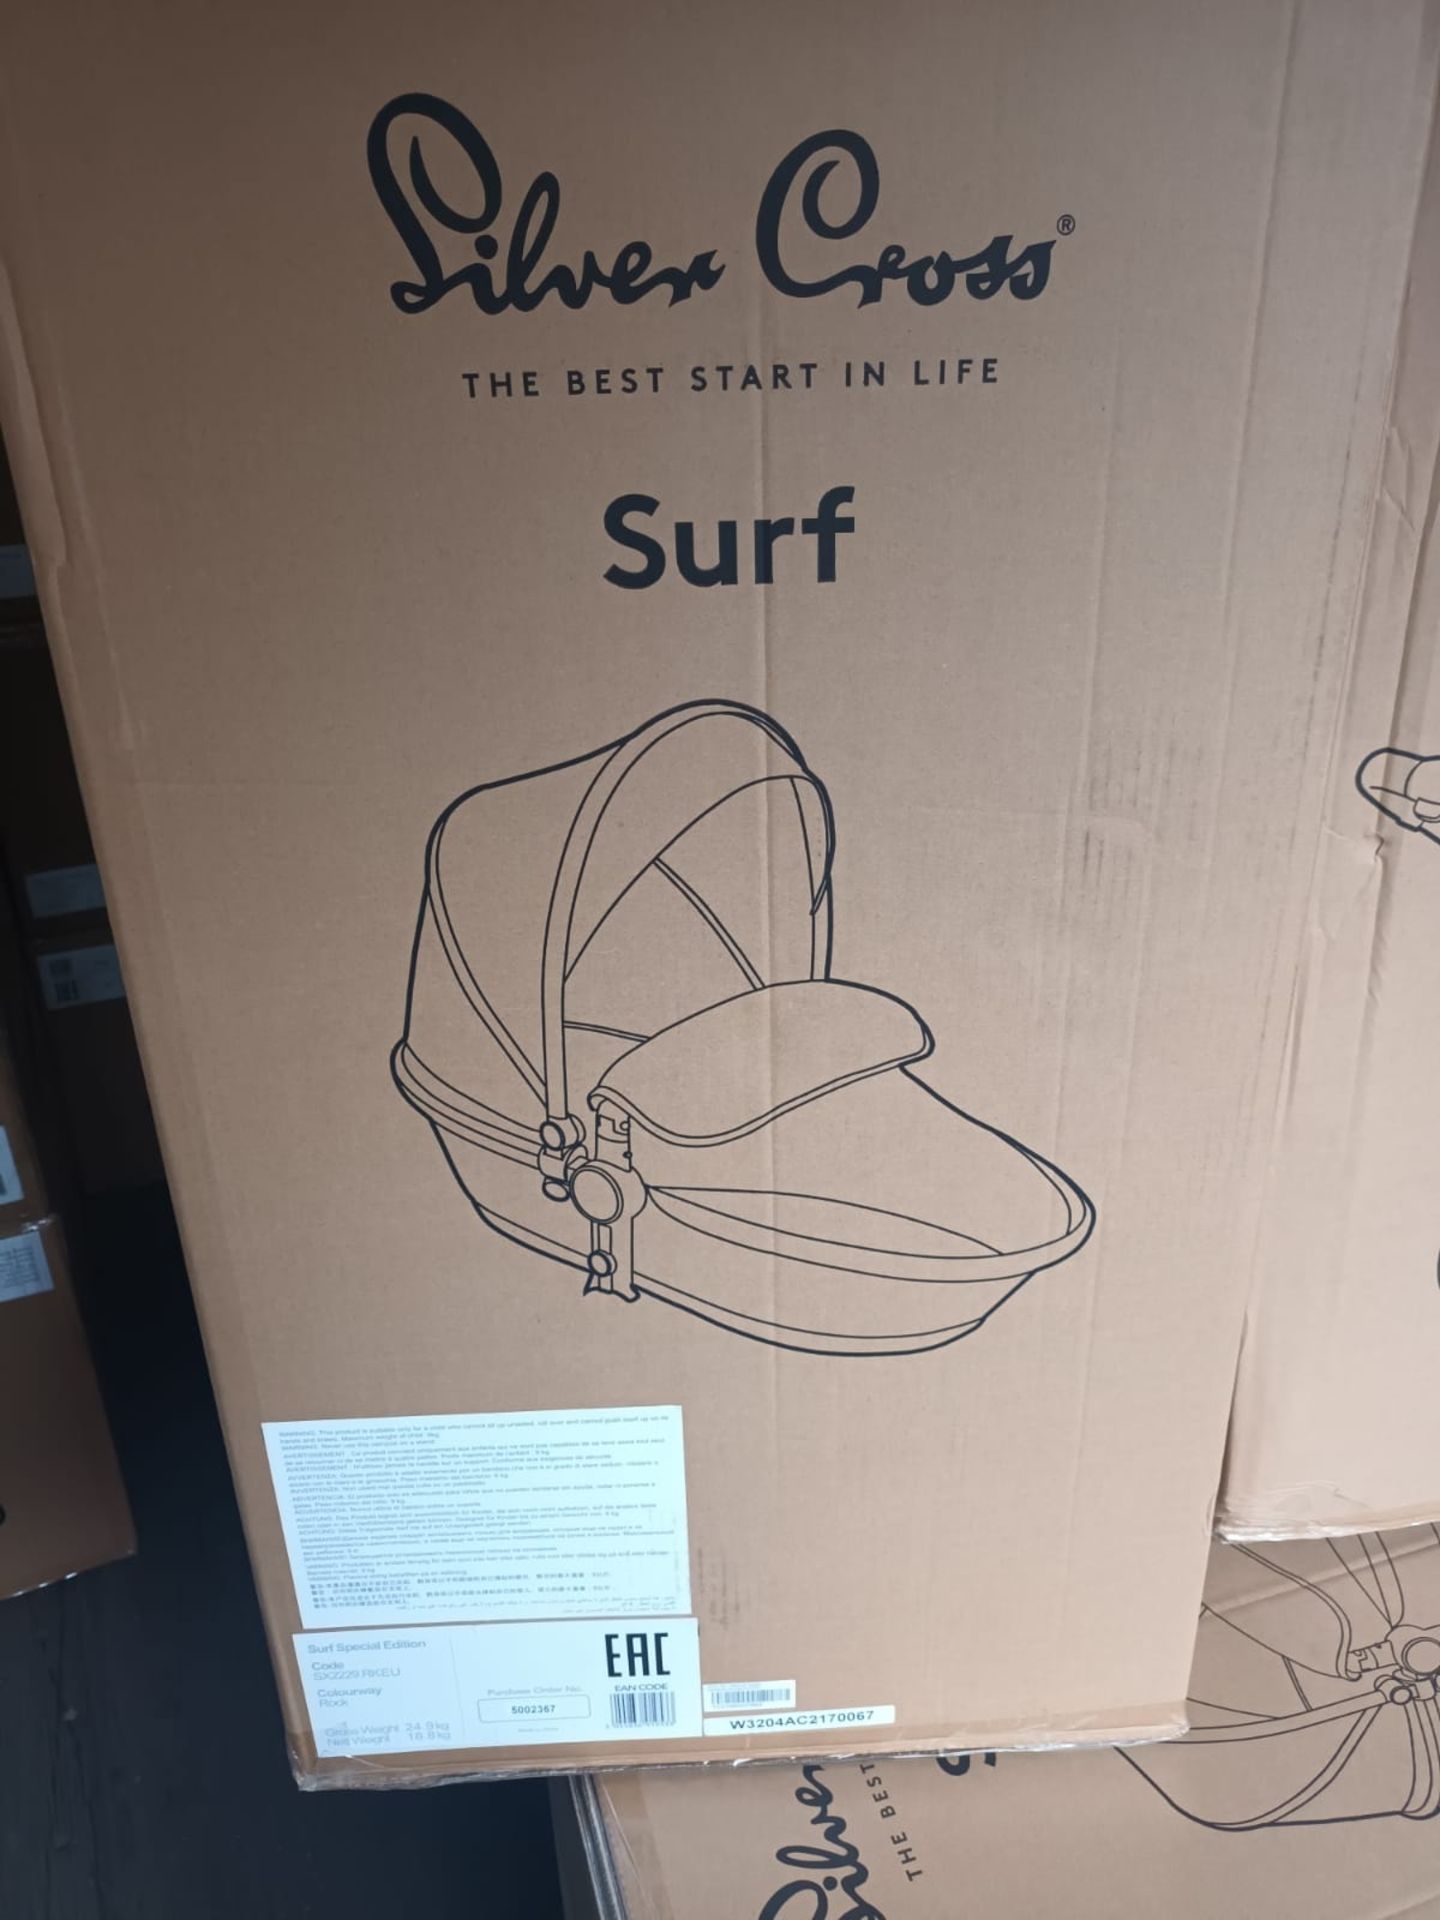 New Boxed Silver Cross Surf ROCK Special Edition Pram. RRP £1,195. Surf Eclipse Special Edition Pram - Image 6 of 6